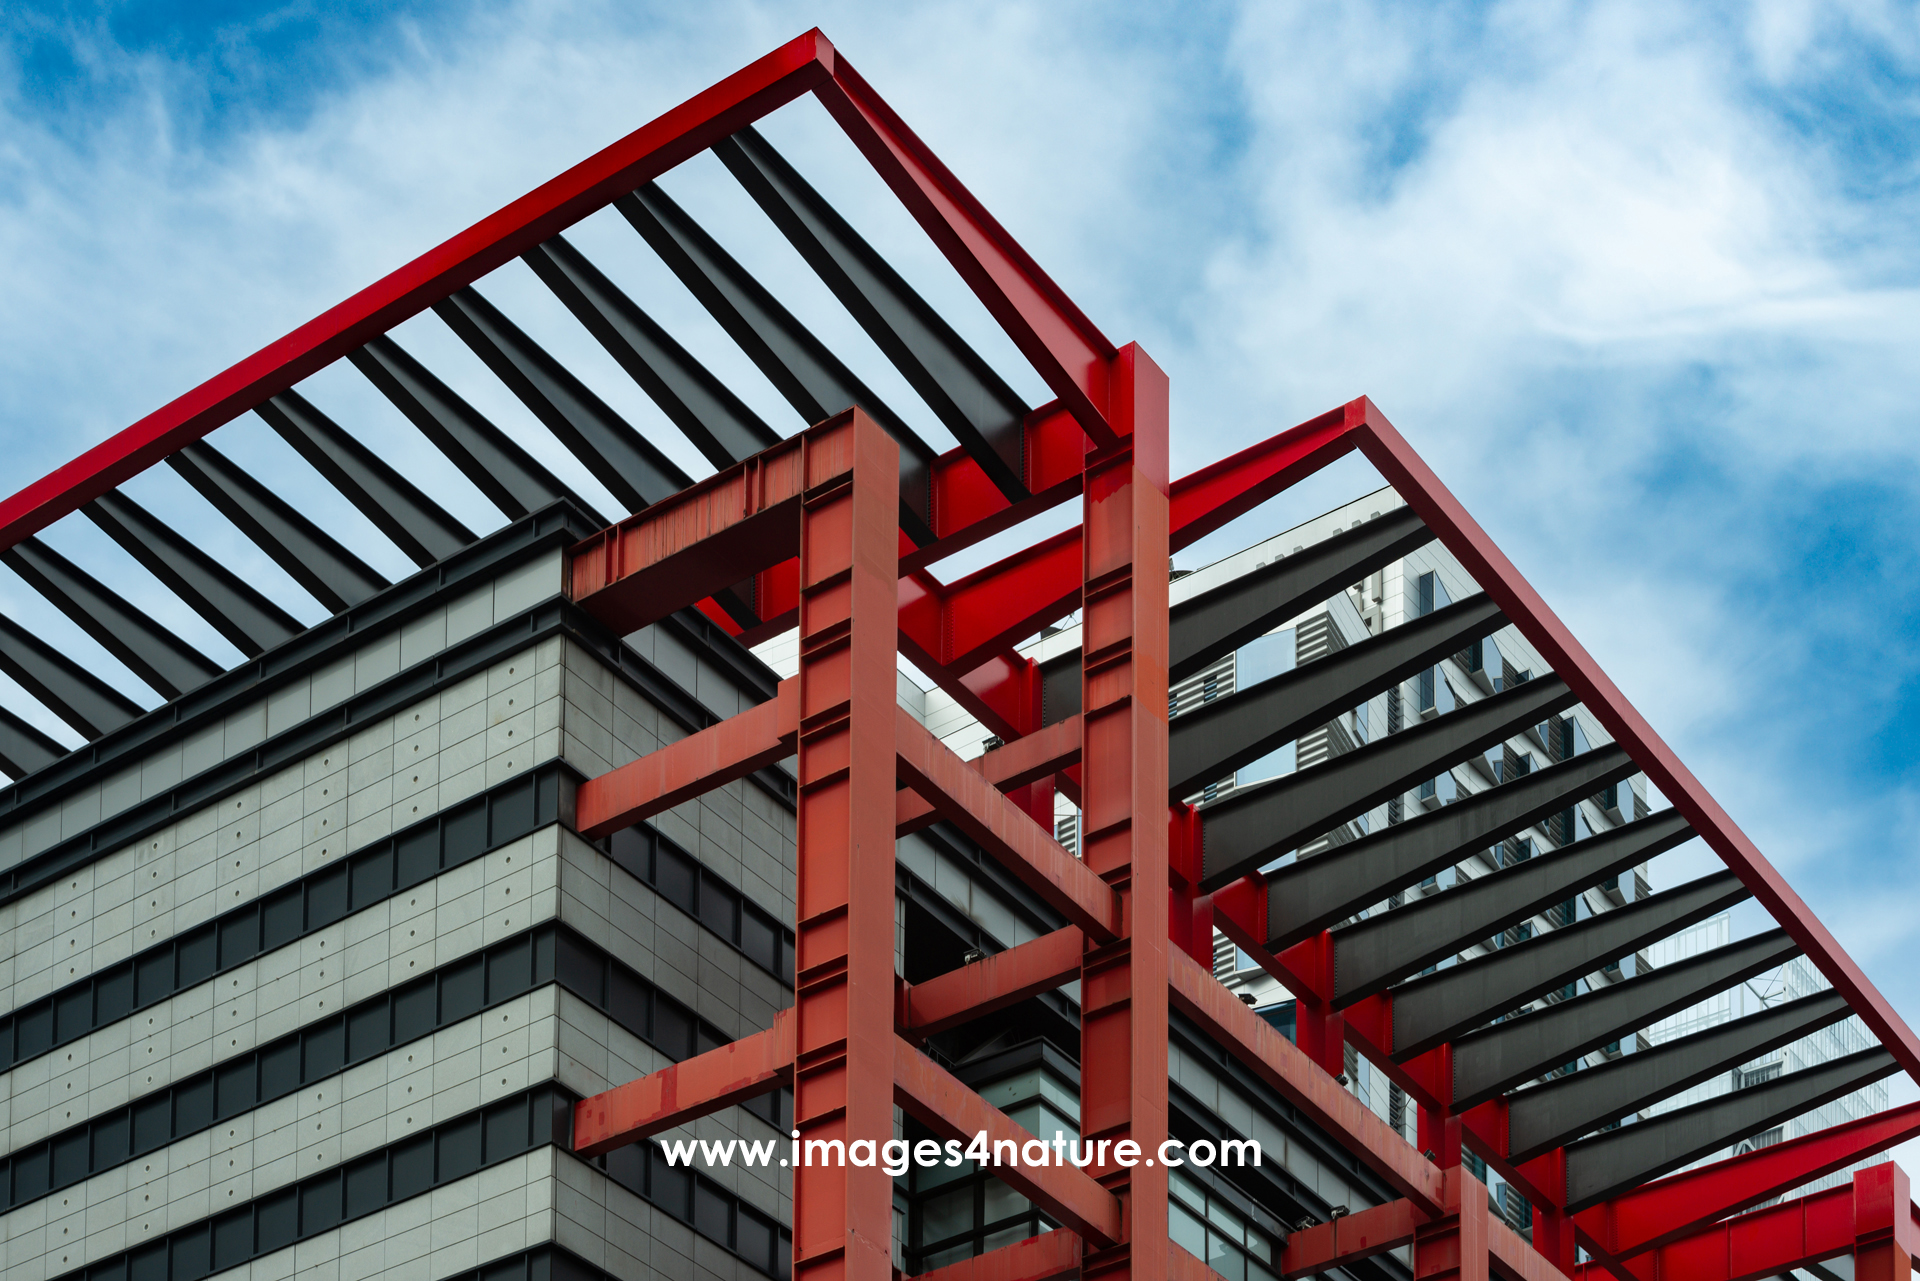 Low-angle view of shopping center with modern red and black metal design against blue sky